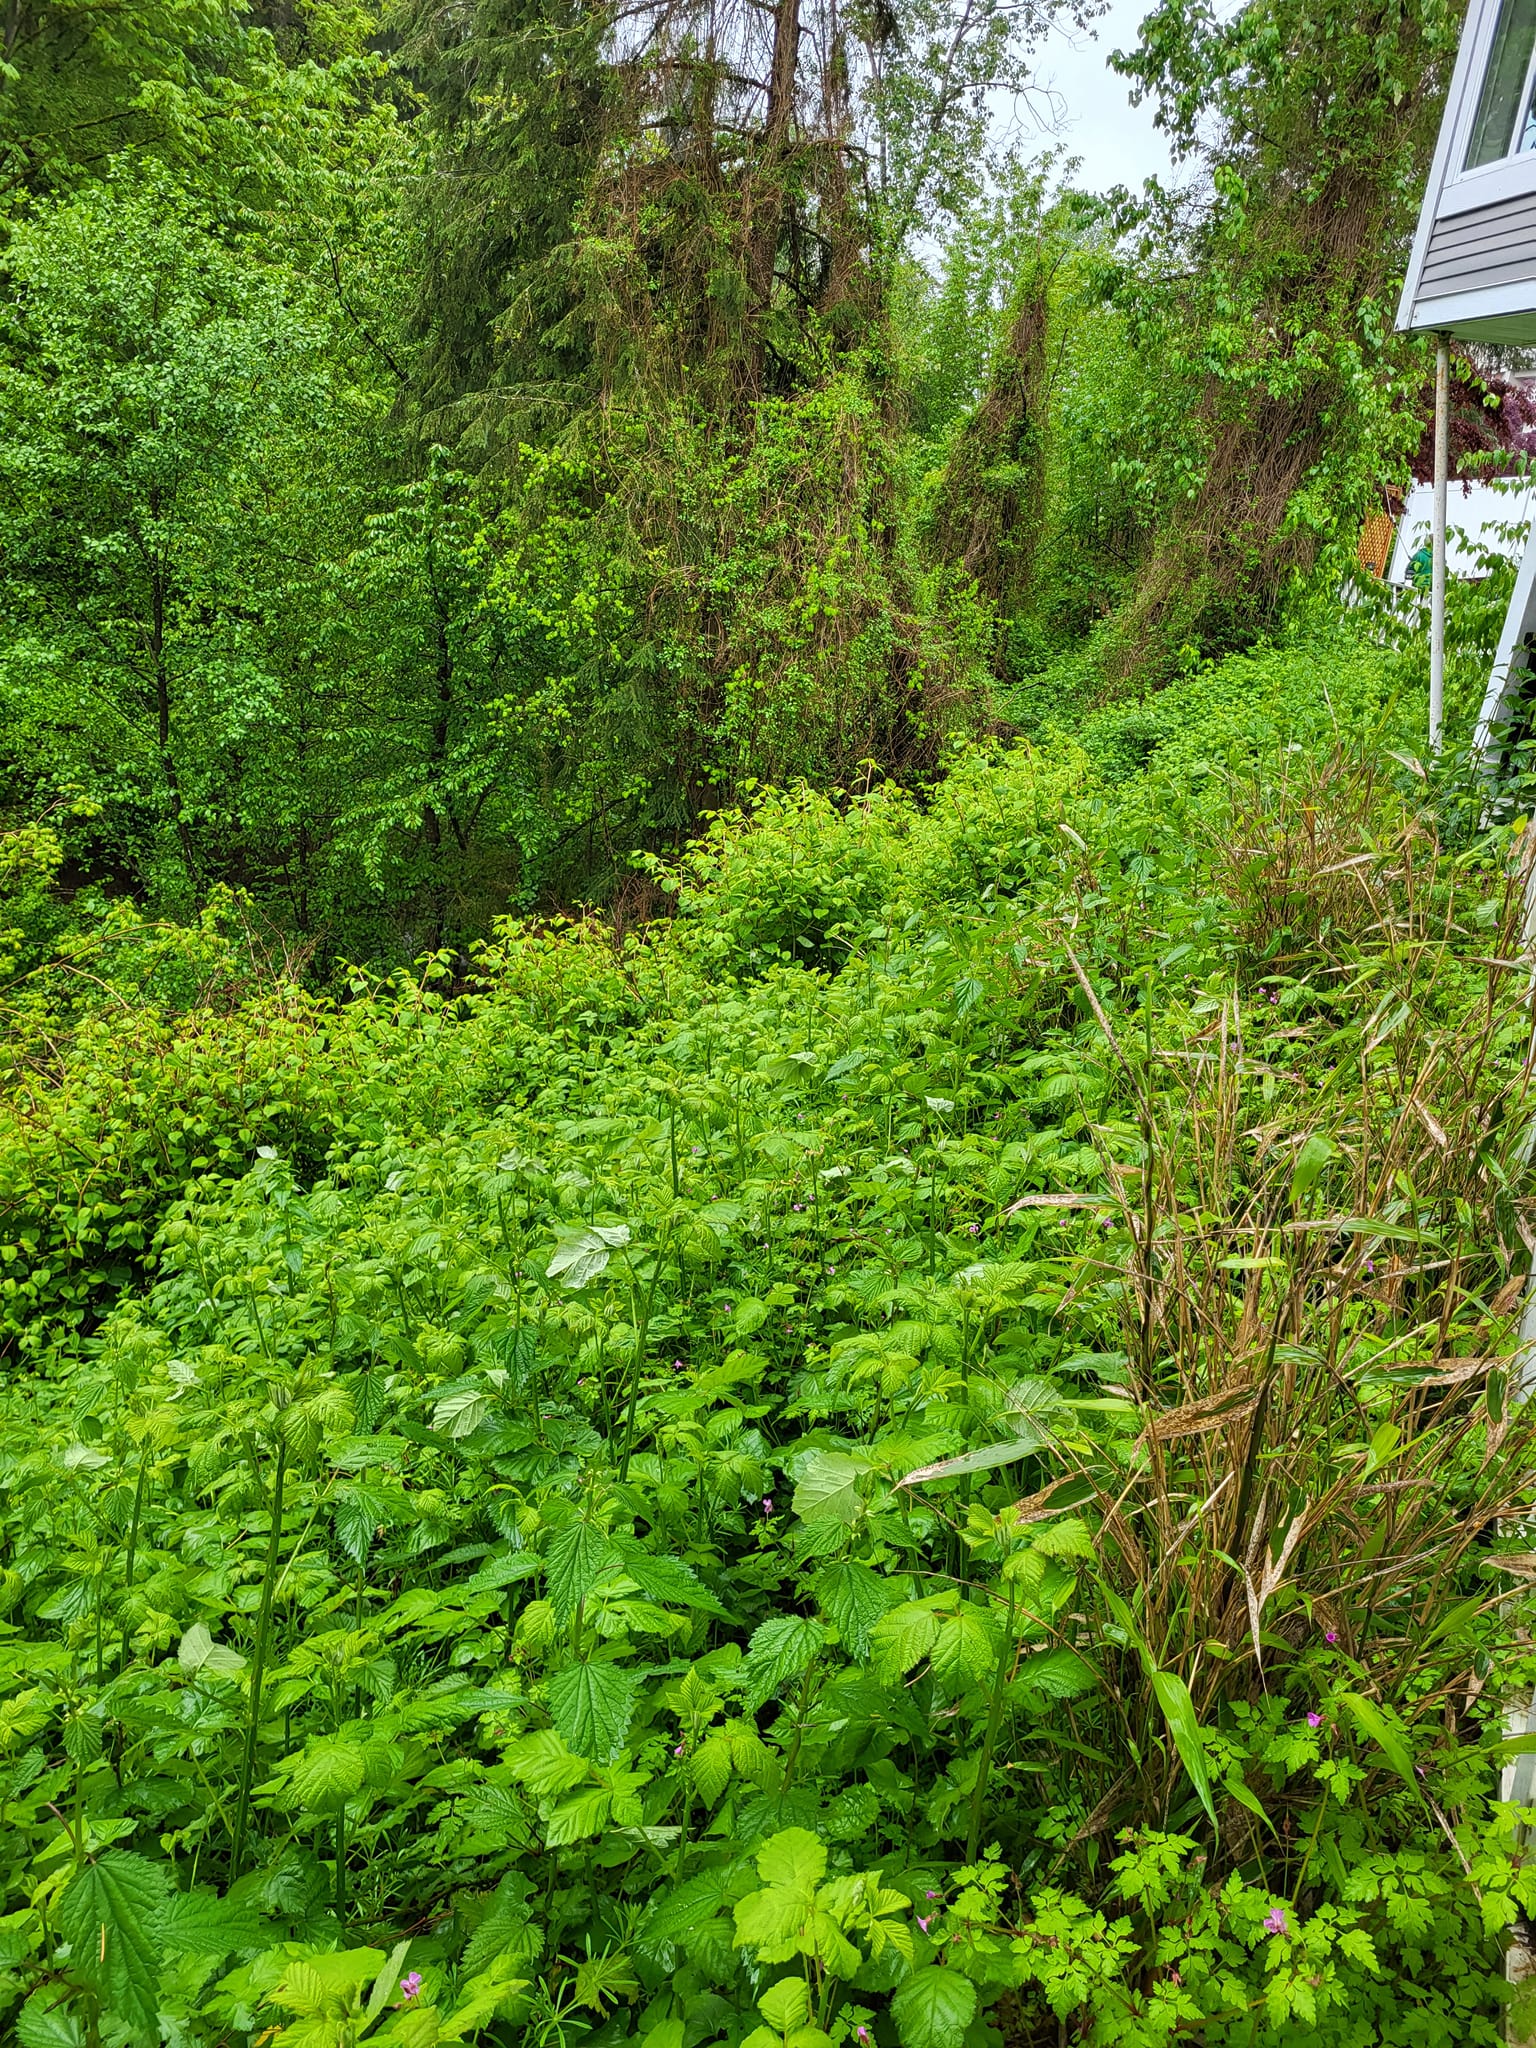 Invasive blackberry bushes covering someone's property entirely in Vancouver, BC